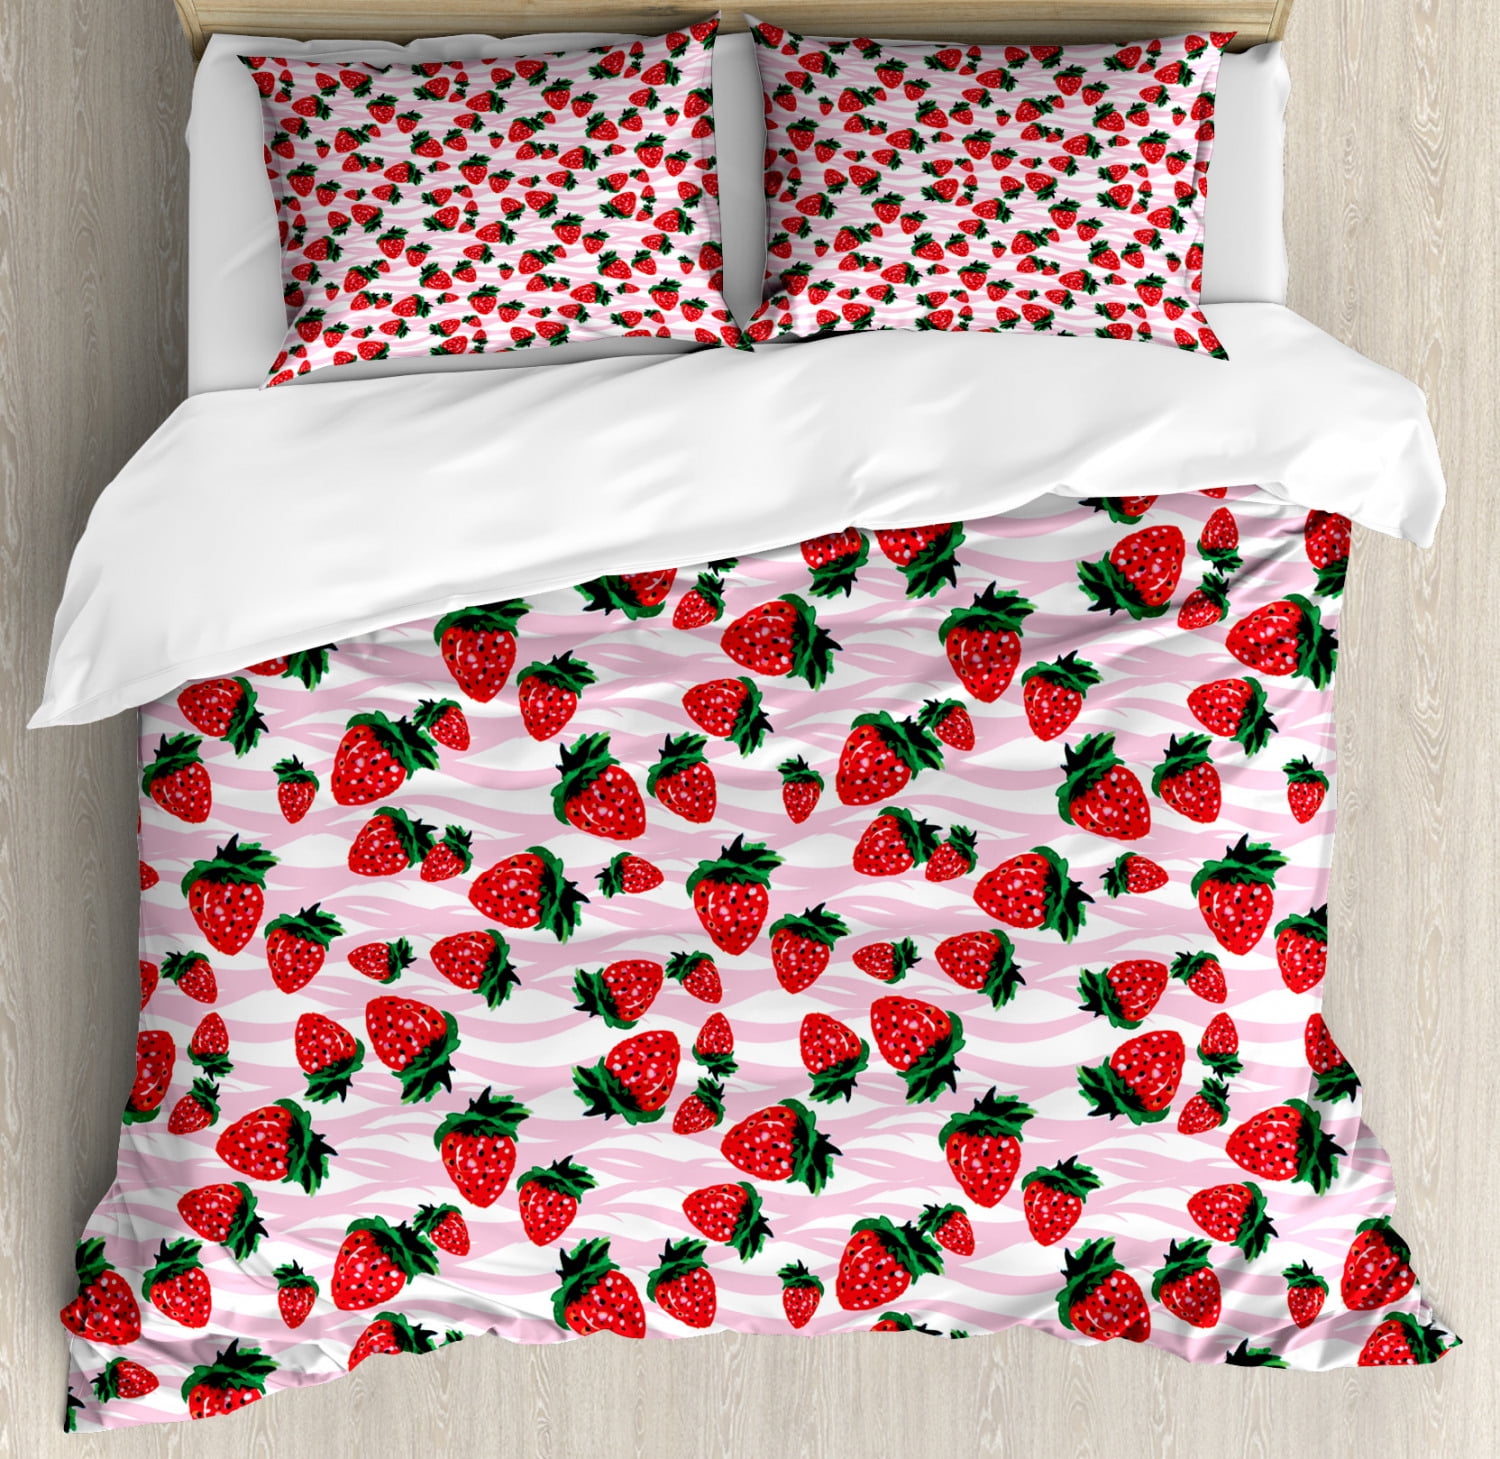 Strawberry Queen Size Duvet Cover Set Hand Drawn Watercolor